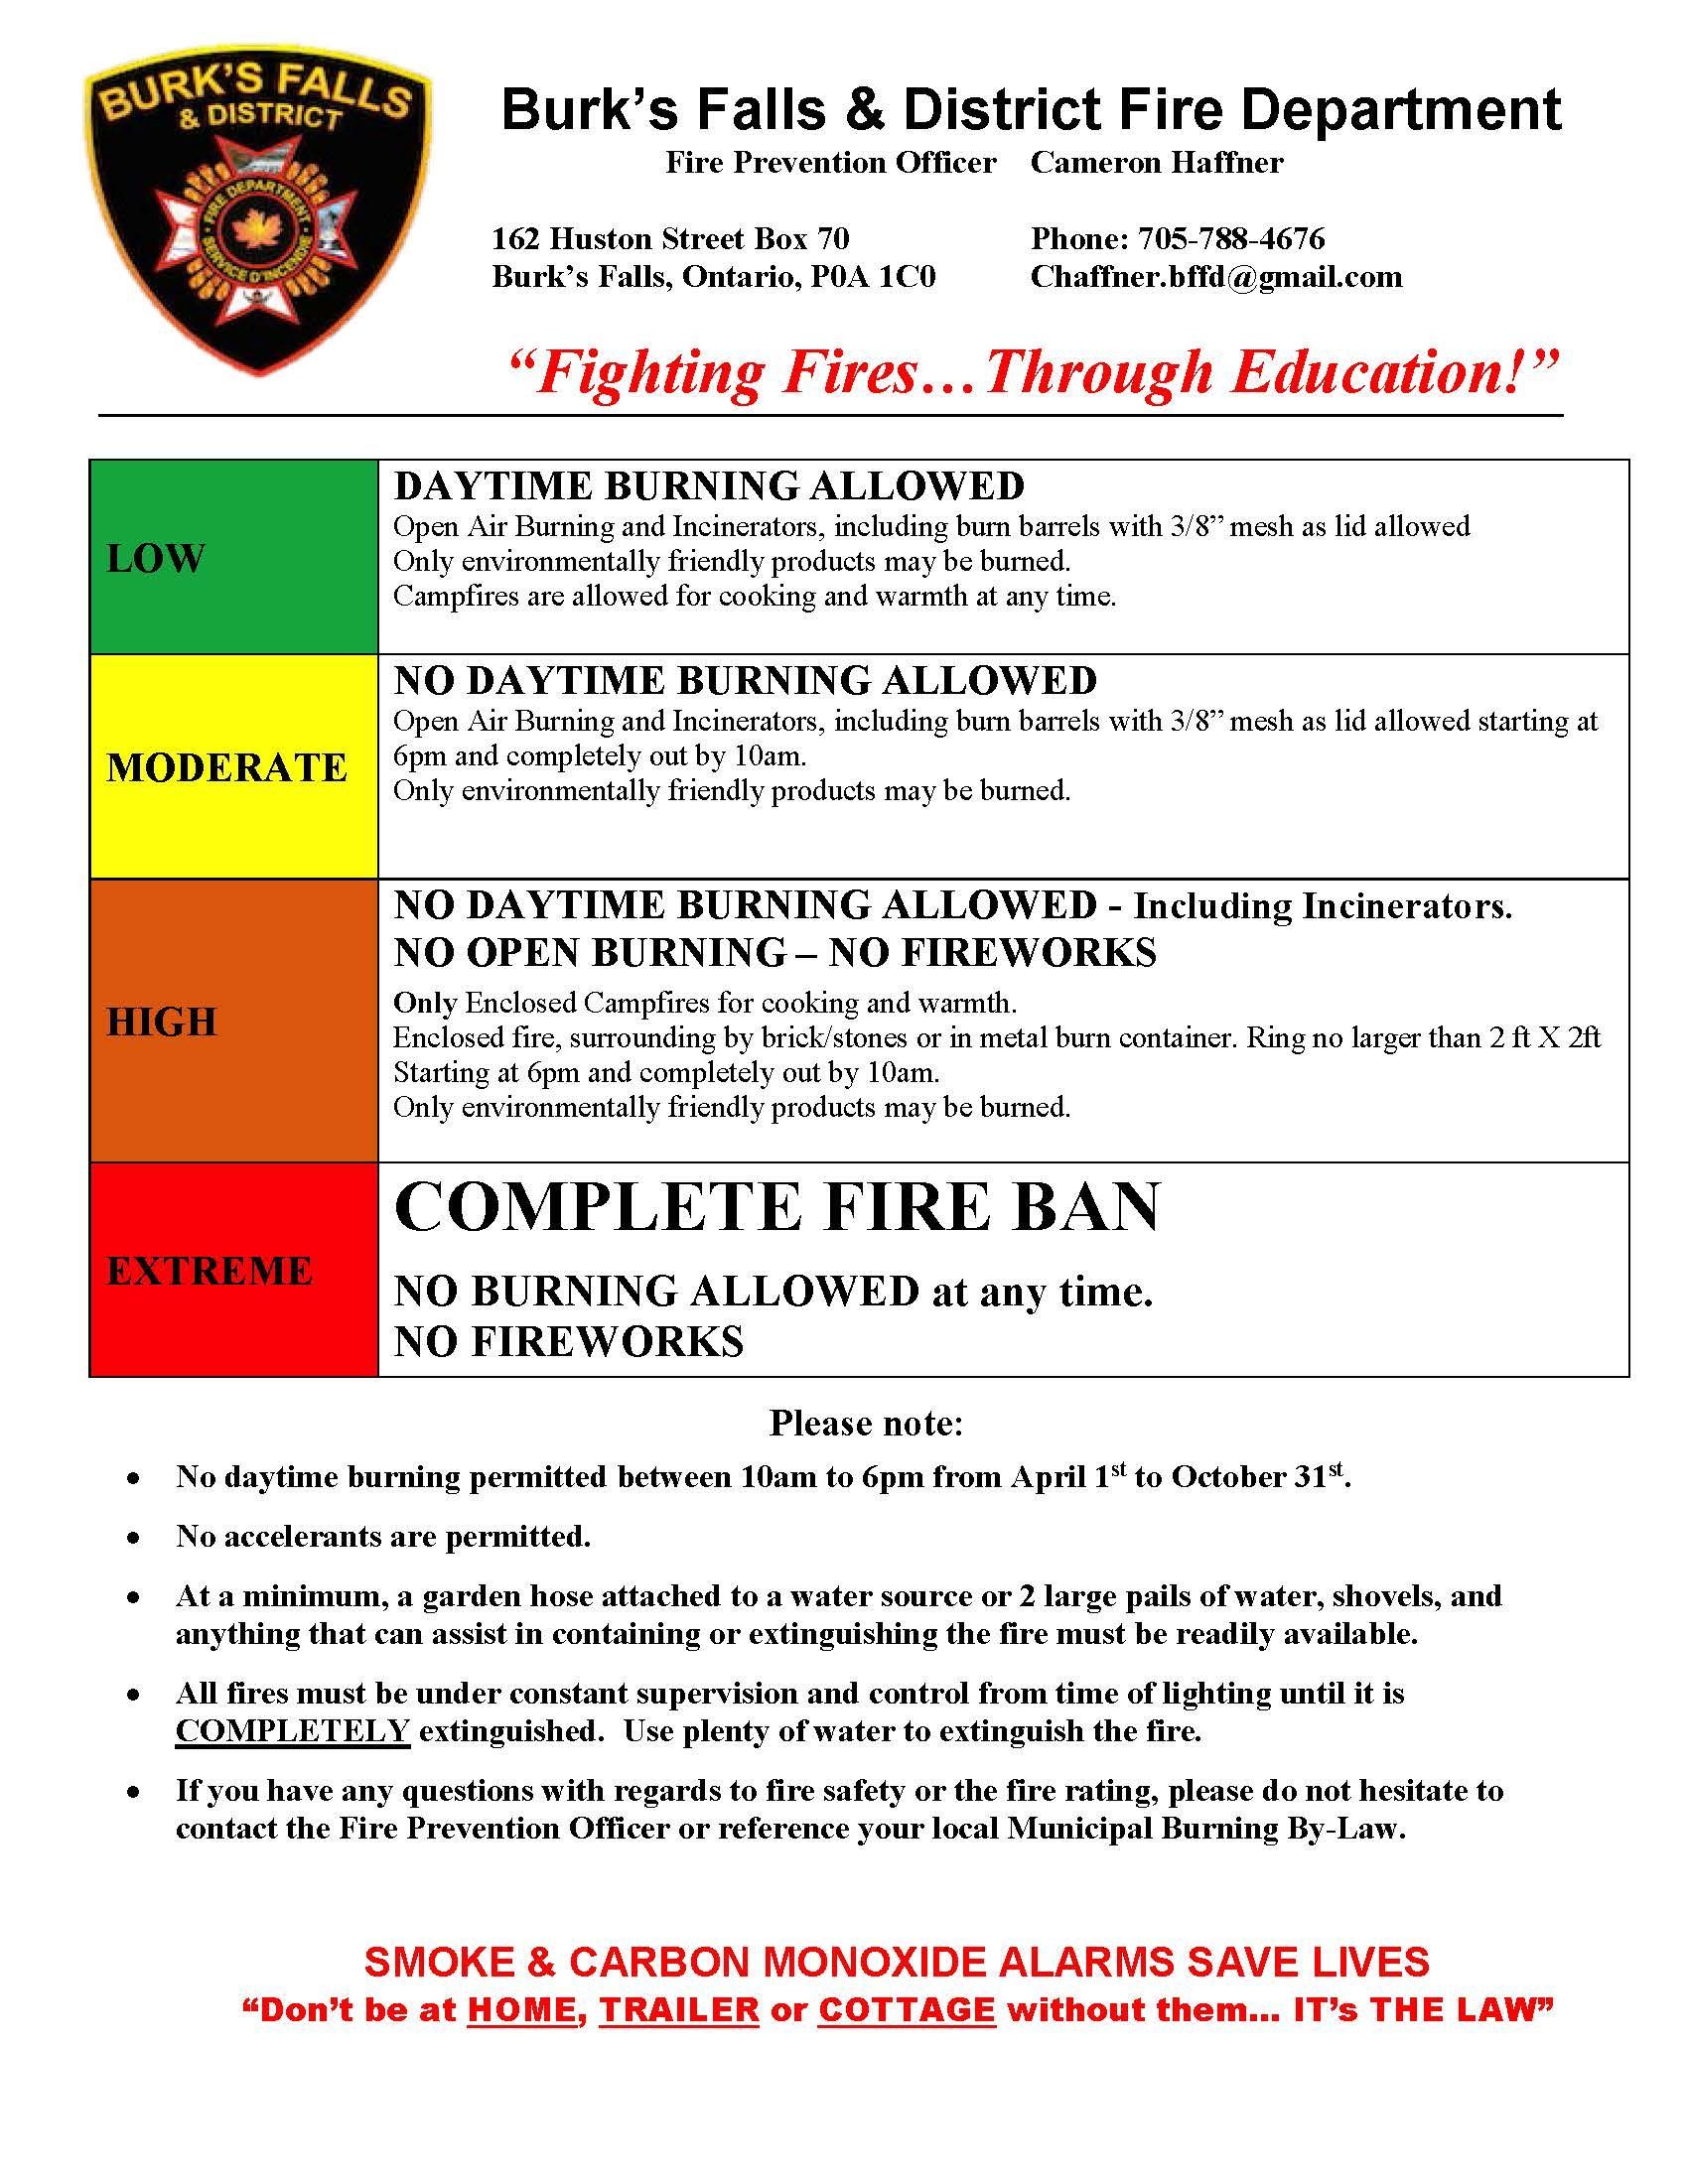 Fire Rating Explanation